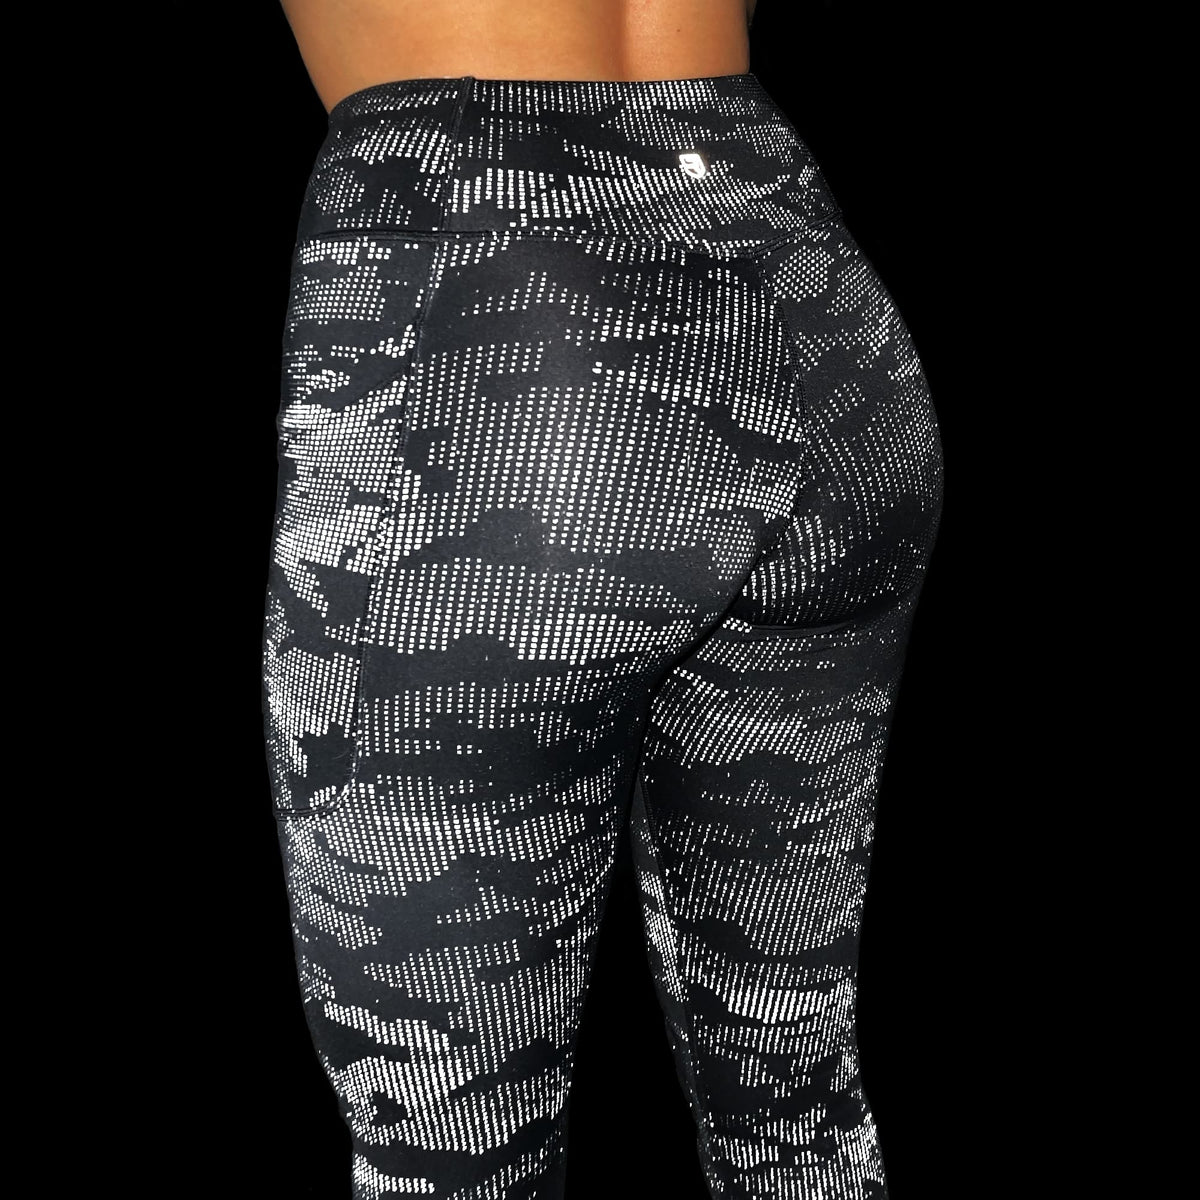 Women's Active High Rise Dark Camouflage Workout Leggings.  (7309156)